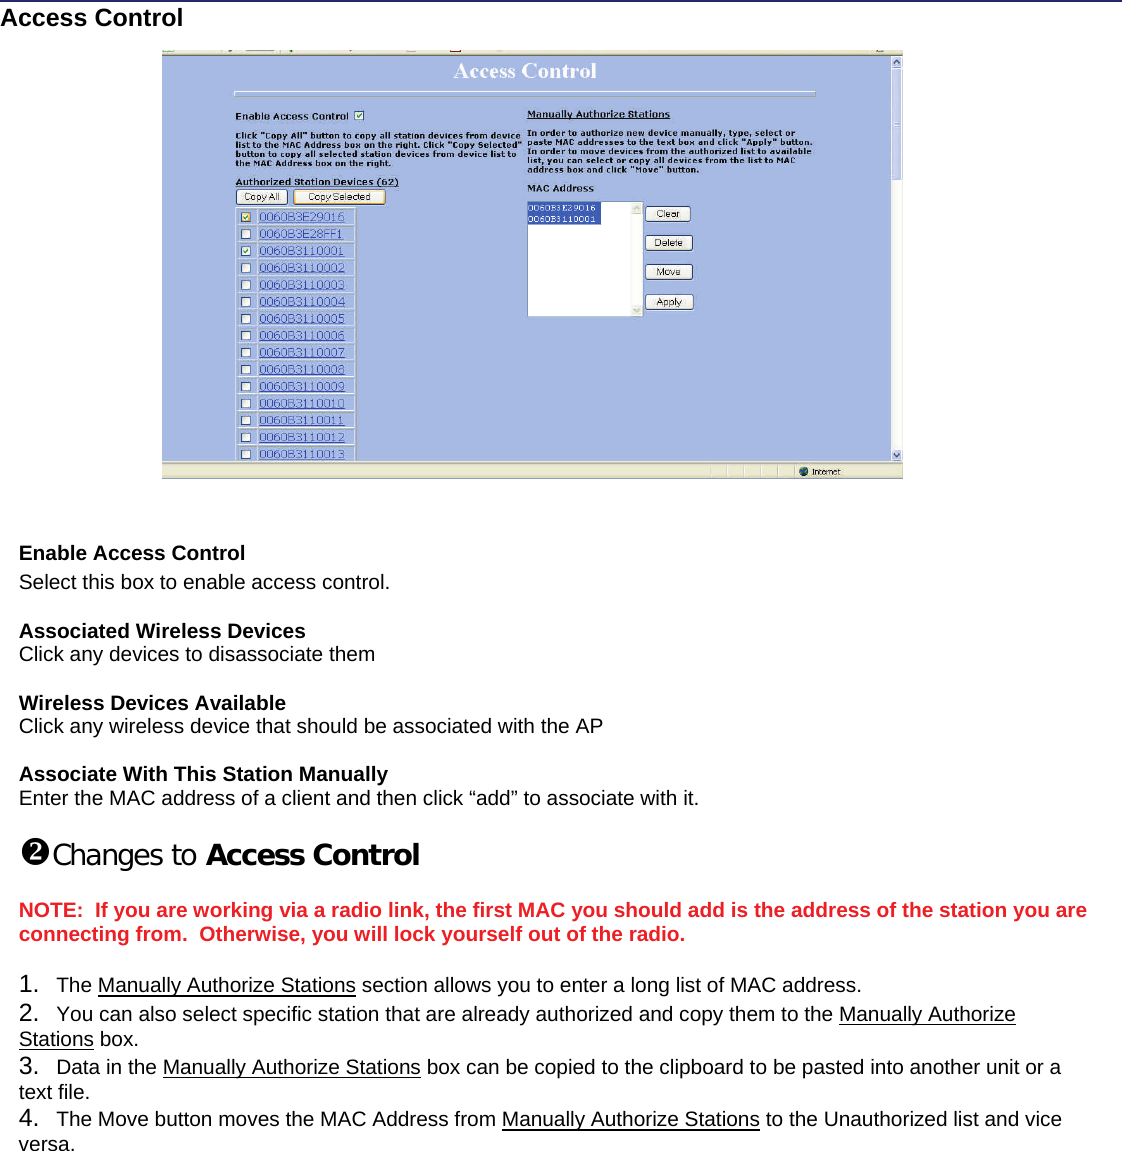   This document is intended for Public Distribution                                                  19473 Fraser Way                   Access Control Enable Access Control Select this box to enable access control.  Associated Wireless Devices Click any devices to disassociate them  Wireless Devices Available Click any wireless device that should be associated with the AP  Associate With This Station Manually Enter the MAC address of a client and then click “add” to associate with it.  Changes to Access Control  NOTE:  If you are working via a radio link, the first MAC you should add is the address of the station you are connecting from.  Otherwise, you will lock yourself out of the radio.  1.  The Manually Authorize Stations section allows you to enter a long list of MAC address. 2.  You can also select specific station that are already authorized and copy them to the Manually Authorize Stations box. 3.  Data in the Manually Authorize Stations box can be copied to the clipboard to be pasted into another unit or a text file. 4.  The Move button moves the MAC Address from Manually Authorize Stations to the Unauthorized list and vice versa. 